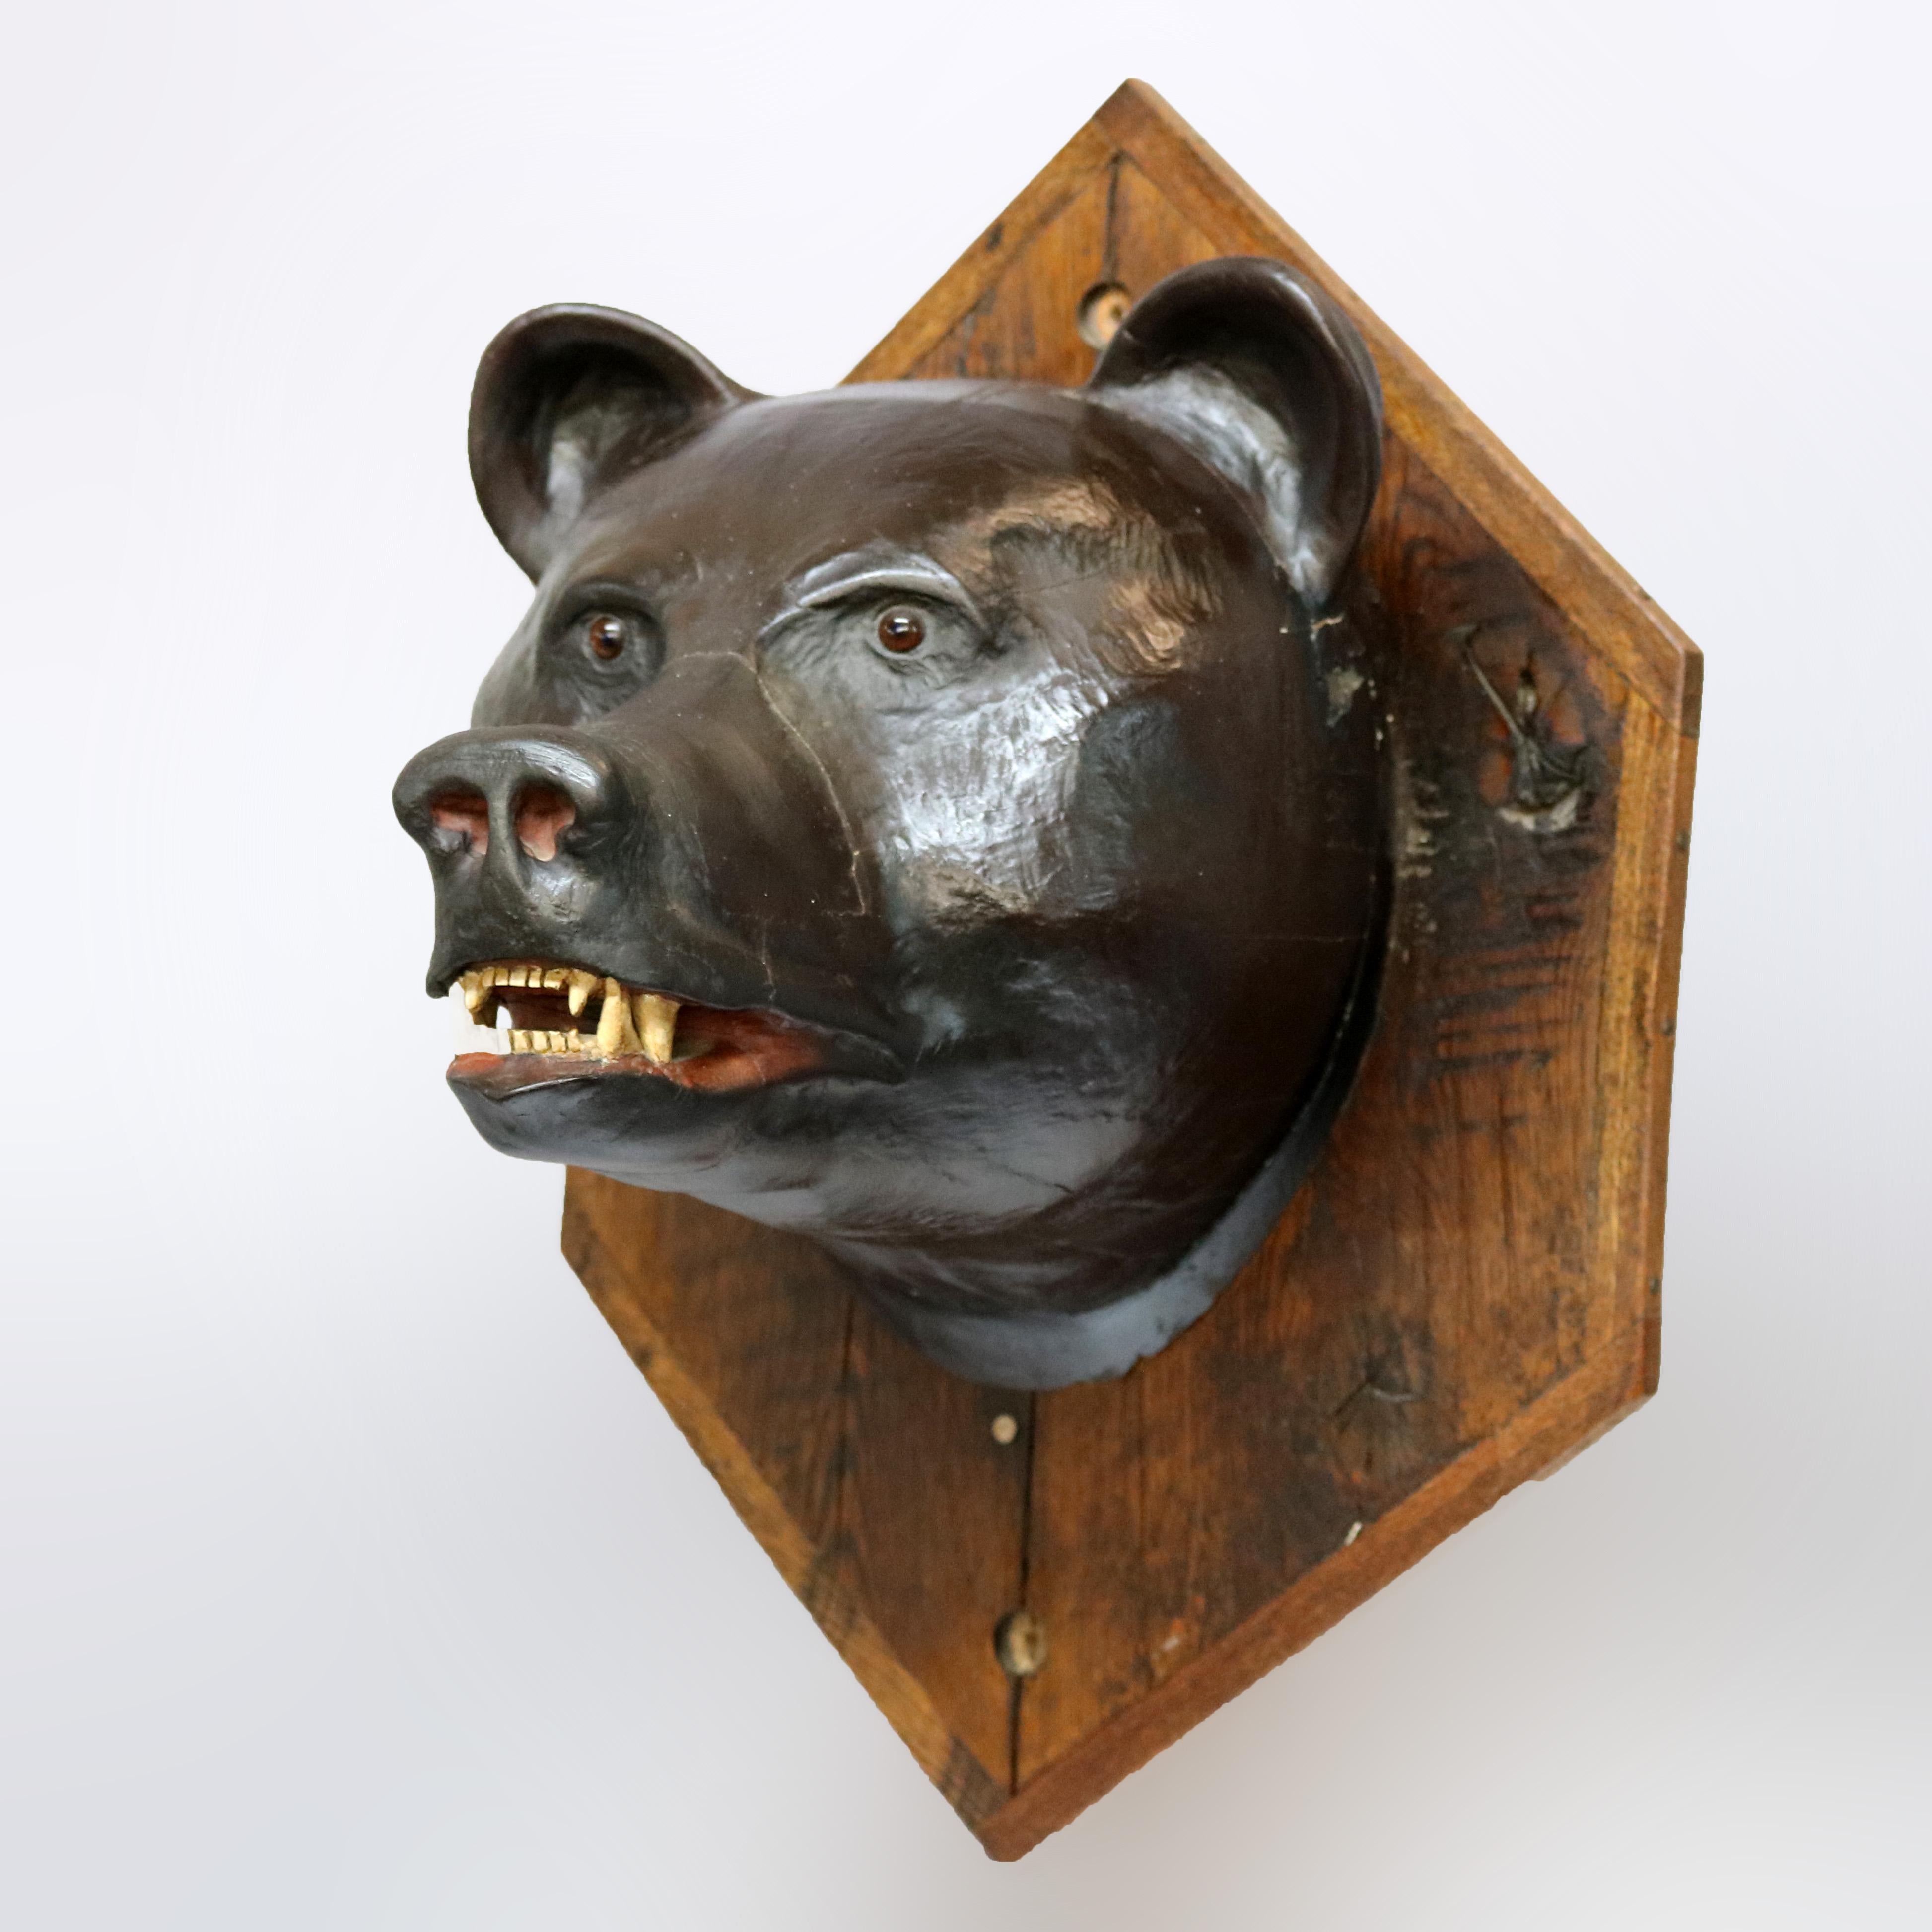 20th Century Antique Figural Carved Wood & Composition Polychromed Bear Mount on Plaque c1900